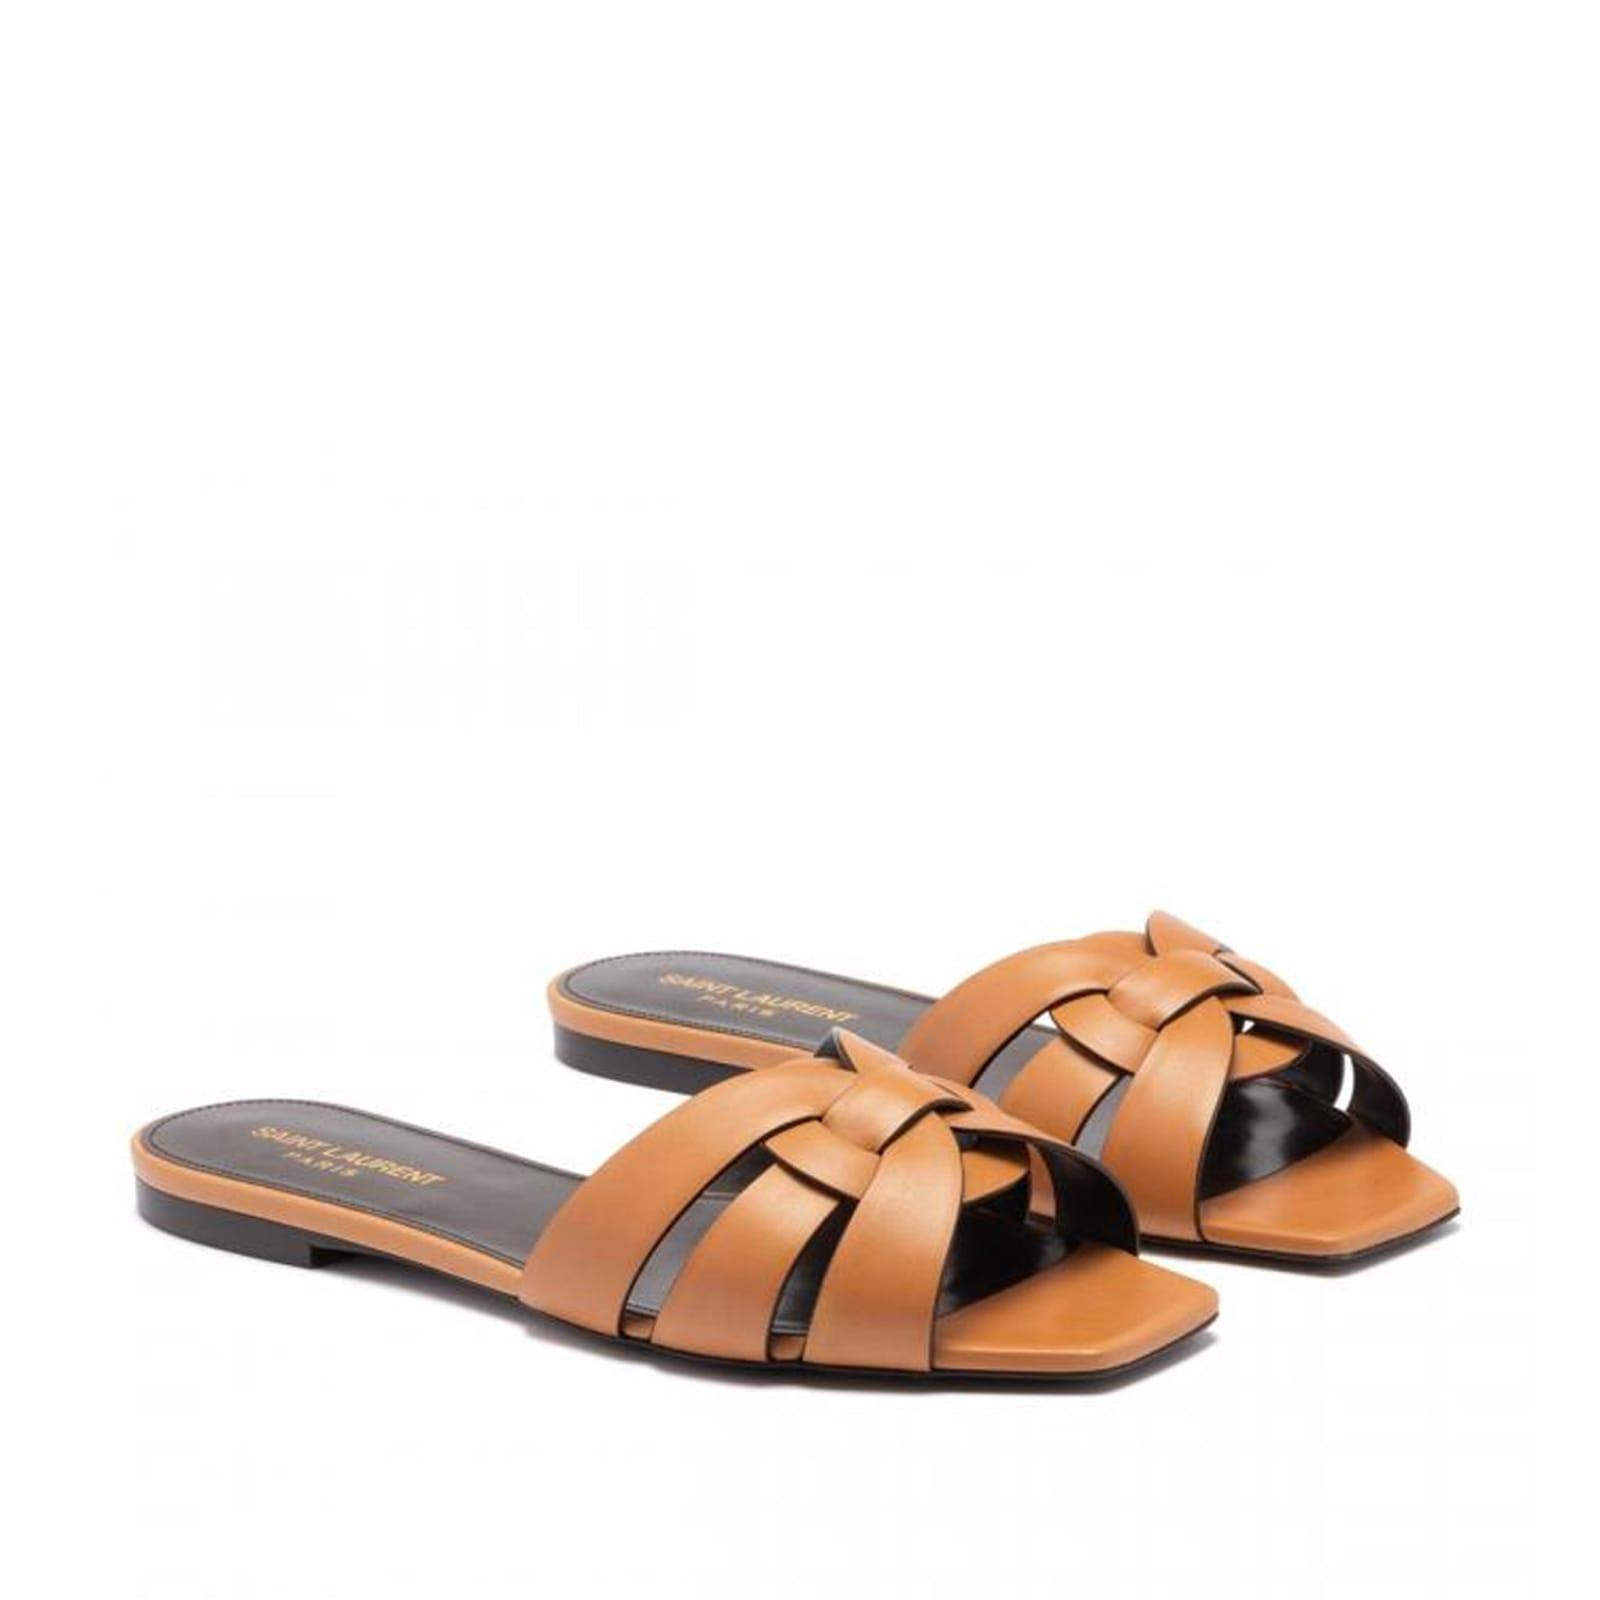 Saint Laurent Tribute Leather Slides in Brown | Lyst